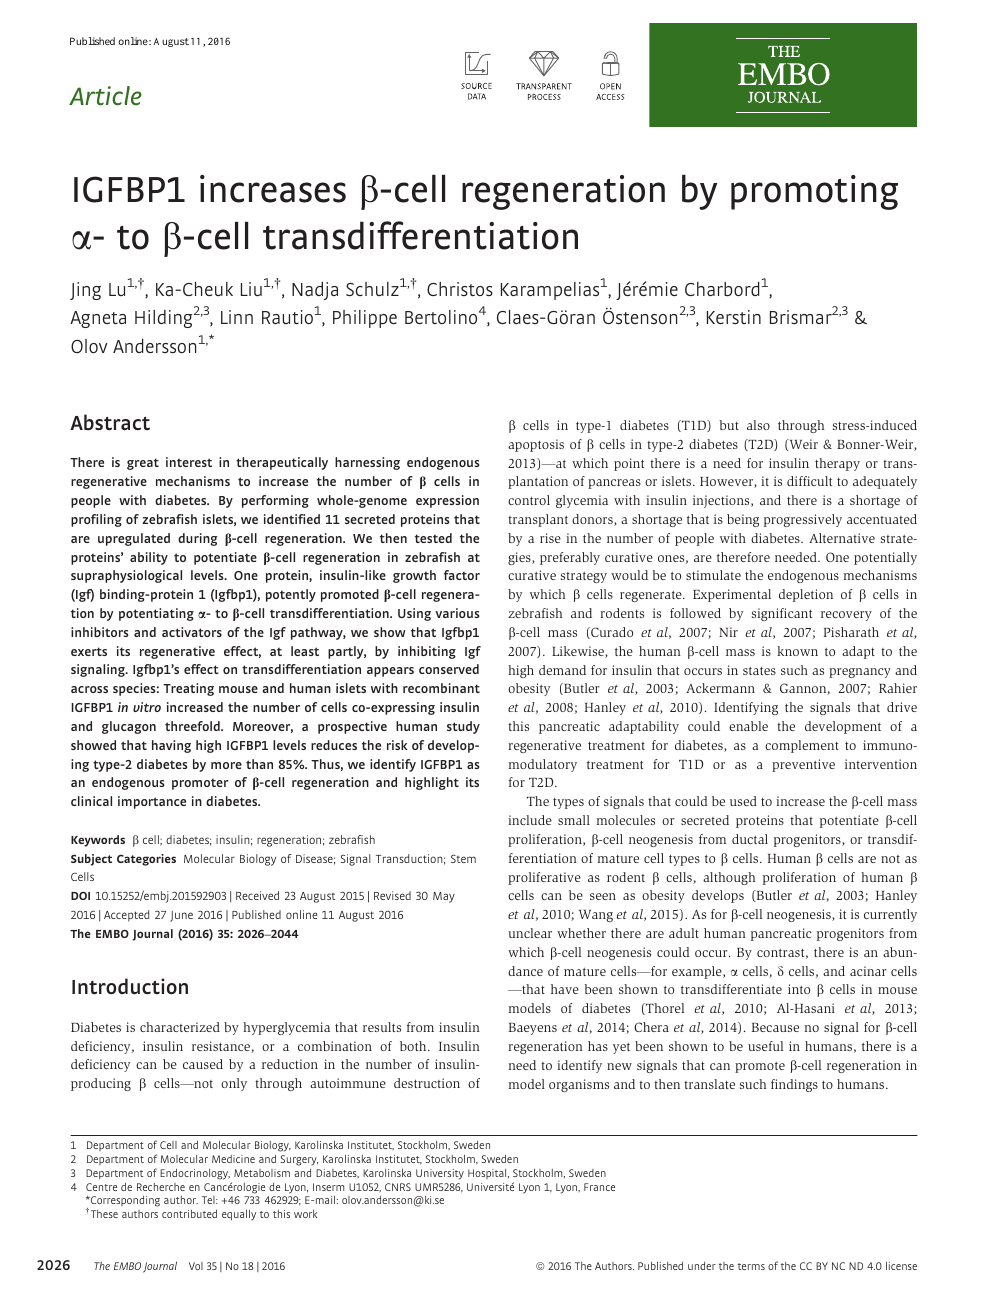 Igfbp1 Increases B Cell Regeneration By Promoting A To B Cell Transdifferentiation Topic Of Research Paper In Biological Sciences Download Scholarly Article Pdf And Read For Free On Cyberleninka Open Science Hub